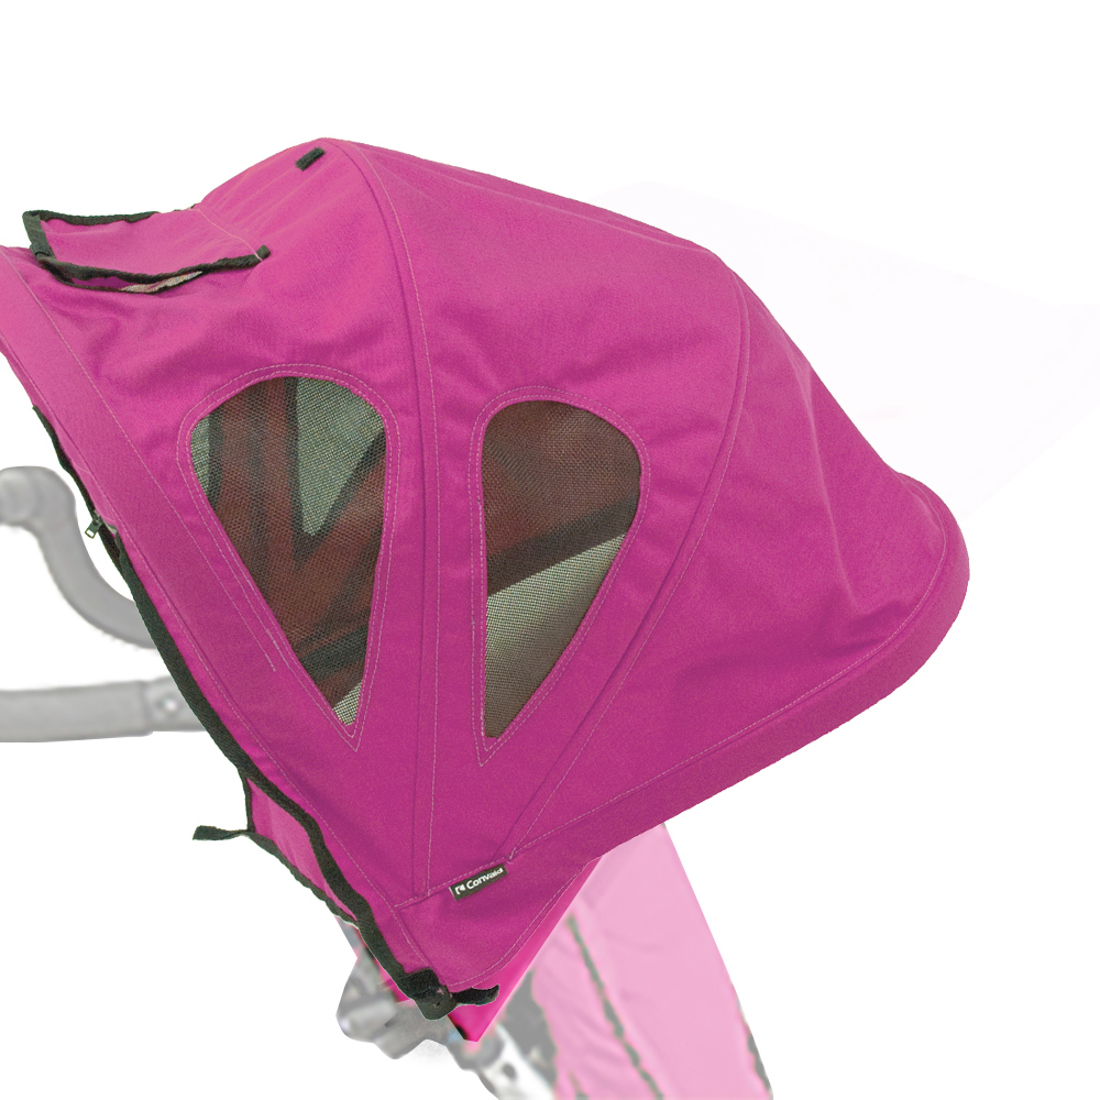 Rodeo-Accessory-Extended-Headrest-Cover-With-Windows-Pink-1000x1000.jpg